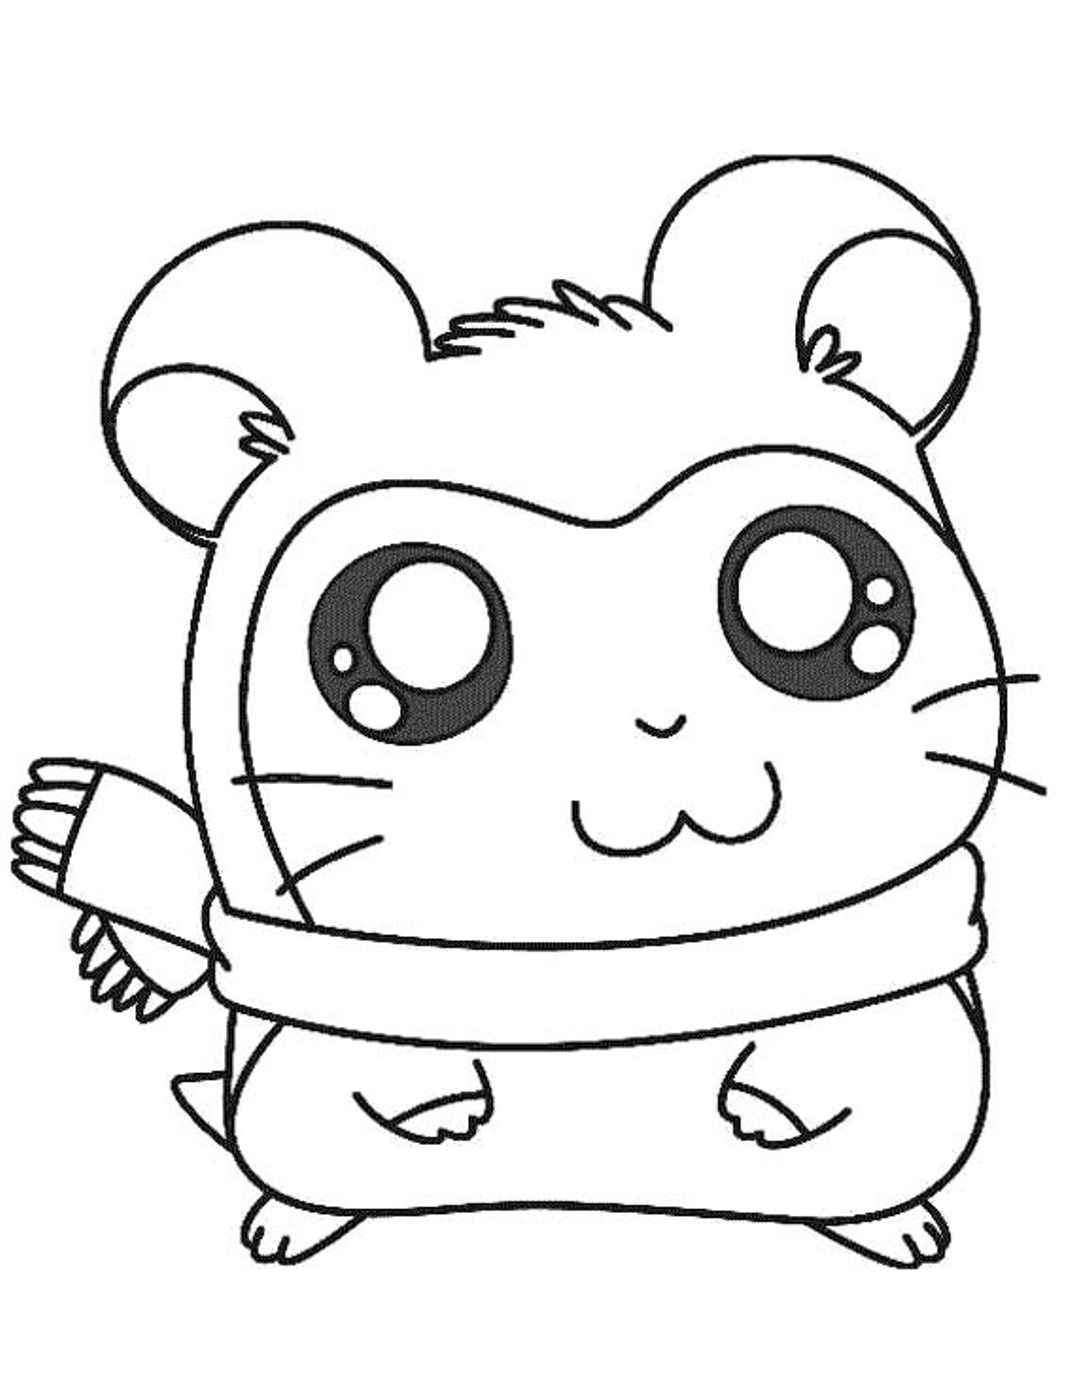 400 Simple Guinea Pig Coloring Pages for Adult